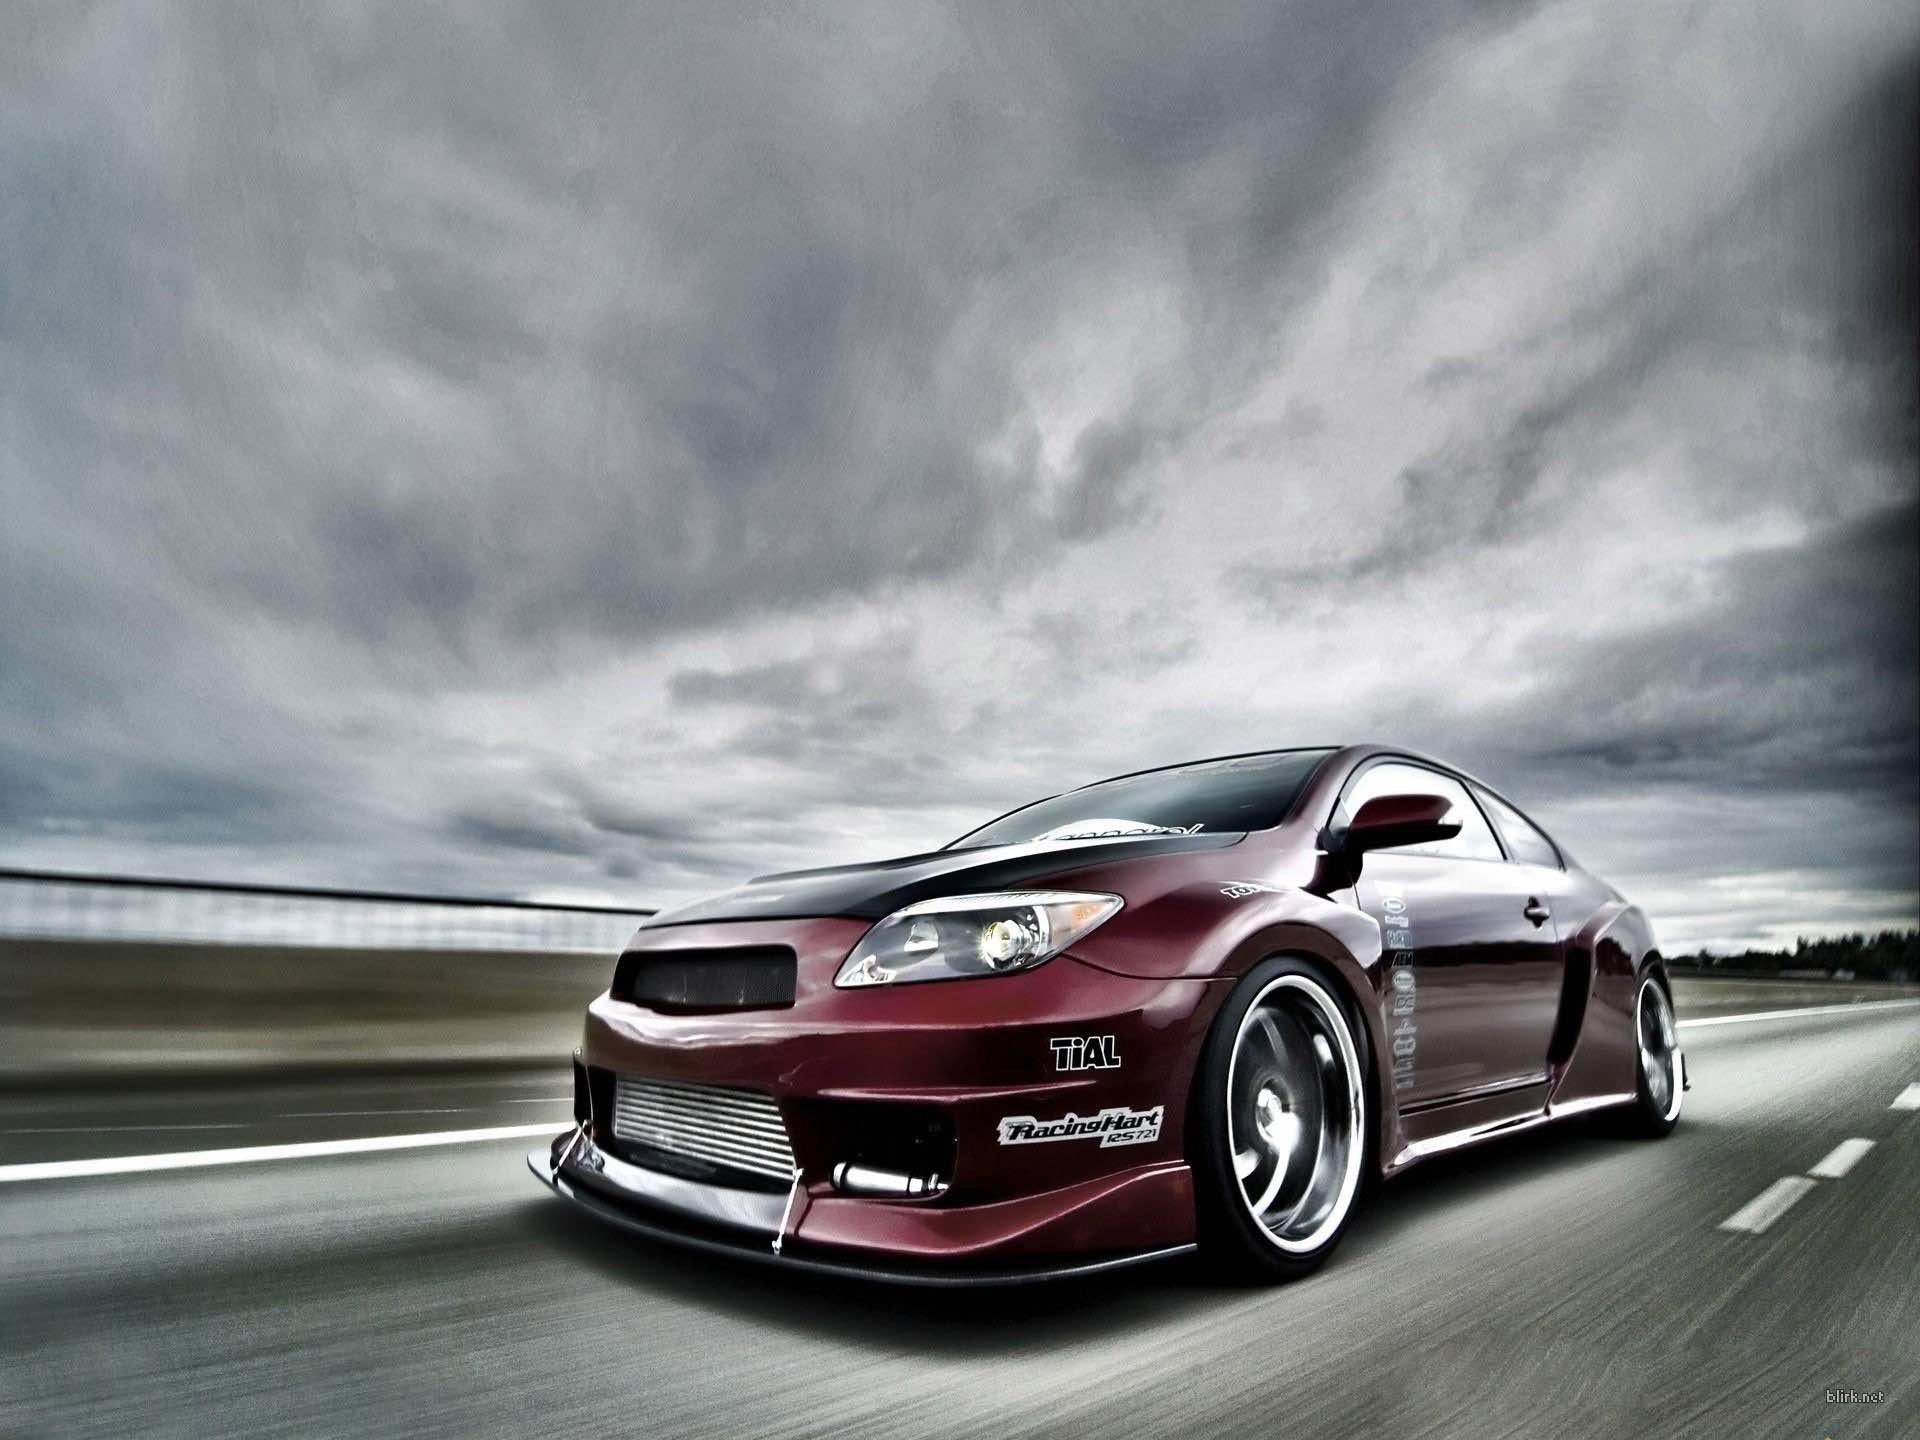 Over 40 HD Stunning Toyota Wallpaper Images For Free Download